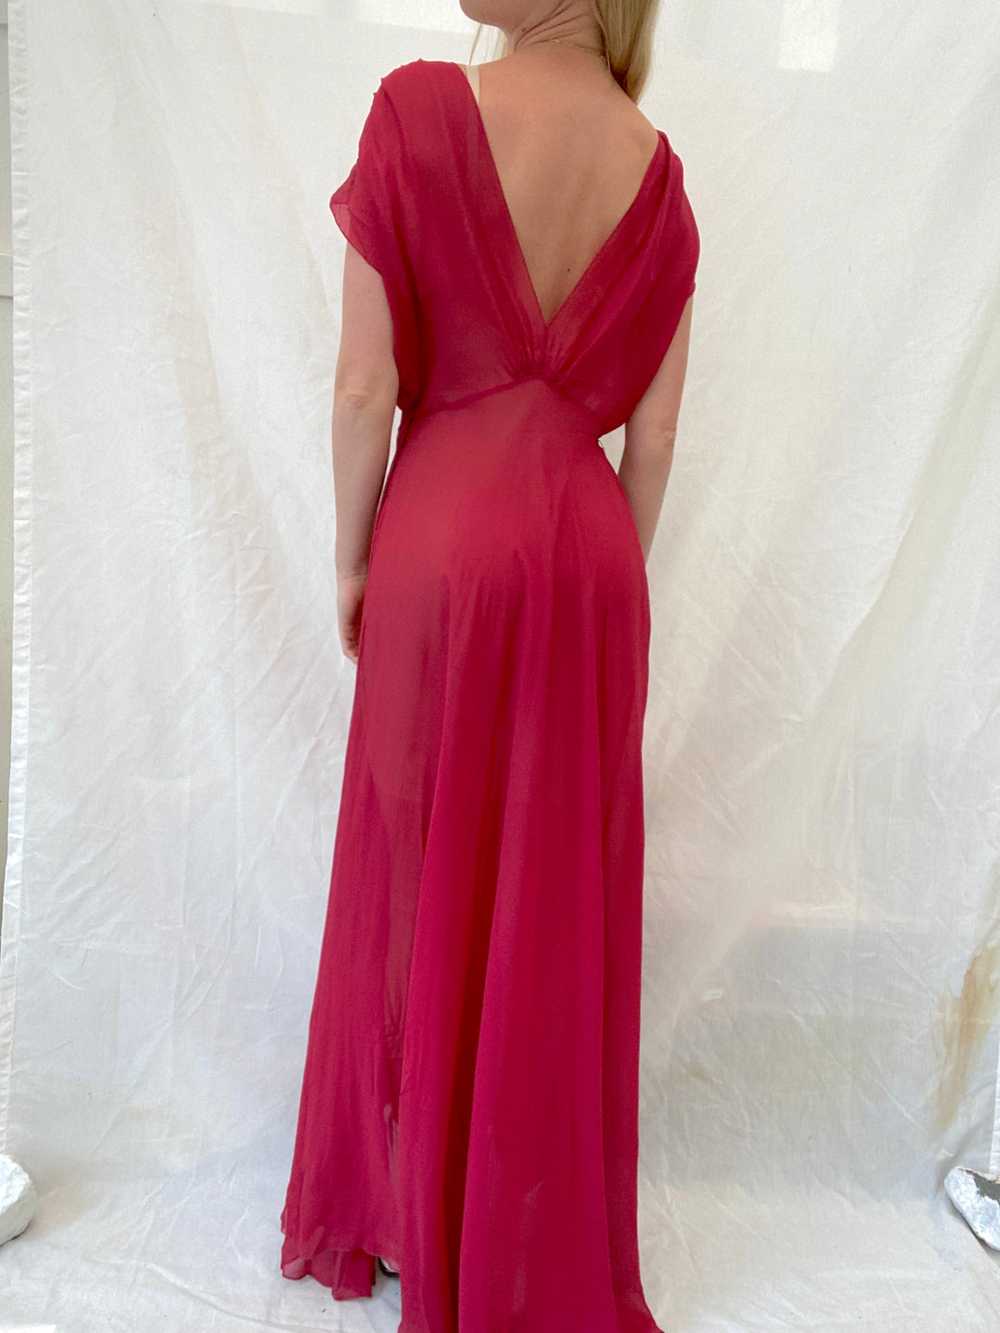 Scarlet Red Chiffon Open Front Dress - image 8